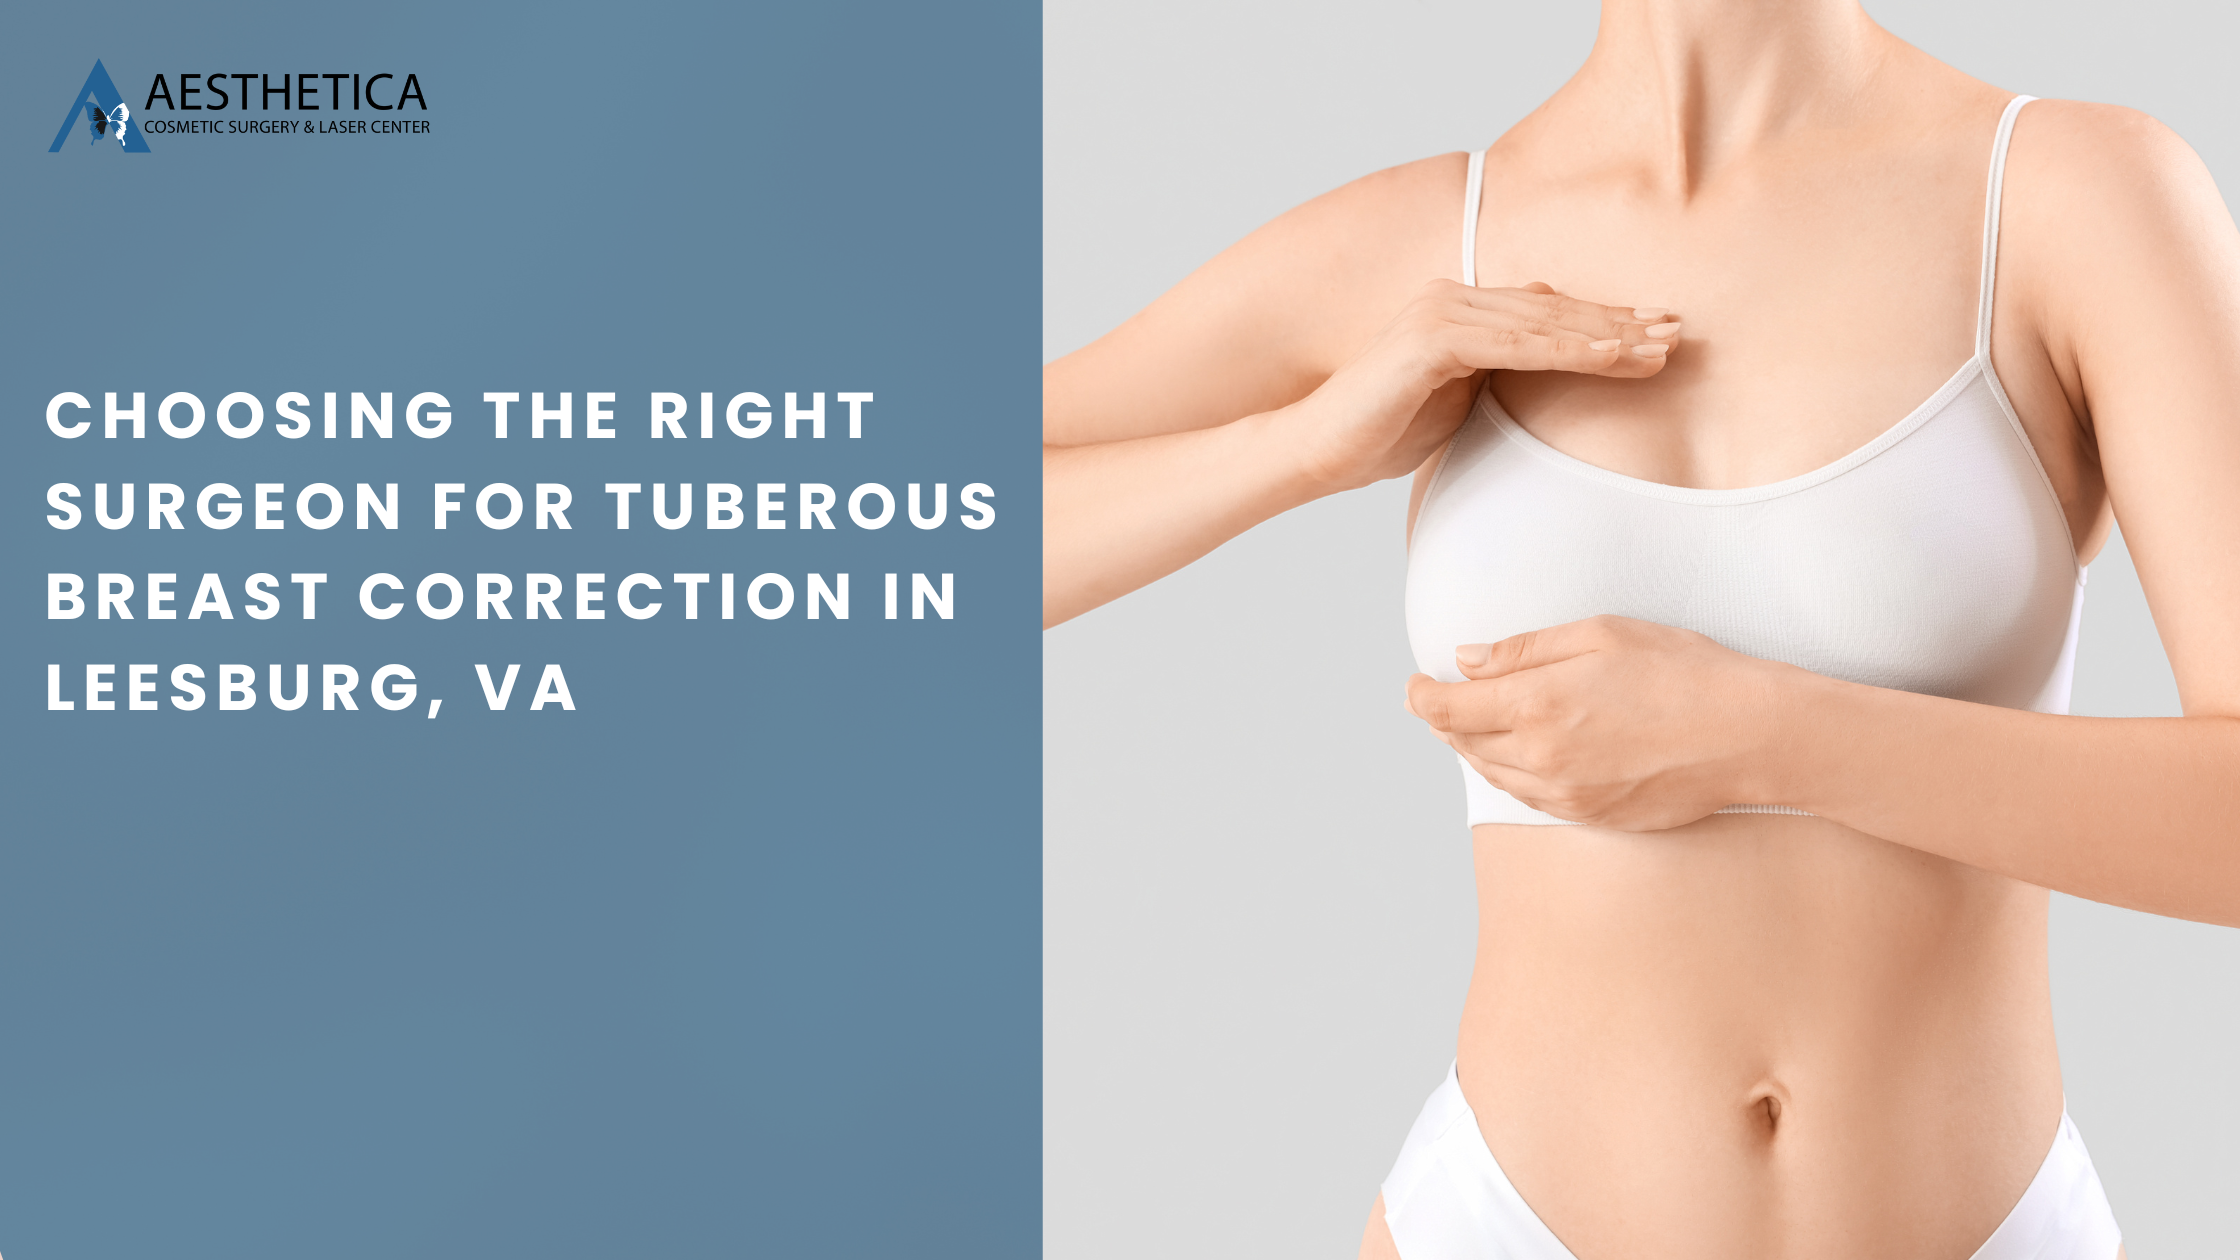 Choosing the Right Surgeon for Tuberous Breast Correction in Leesburg, VA